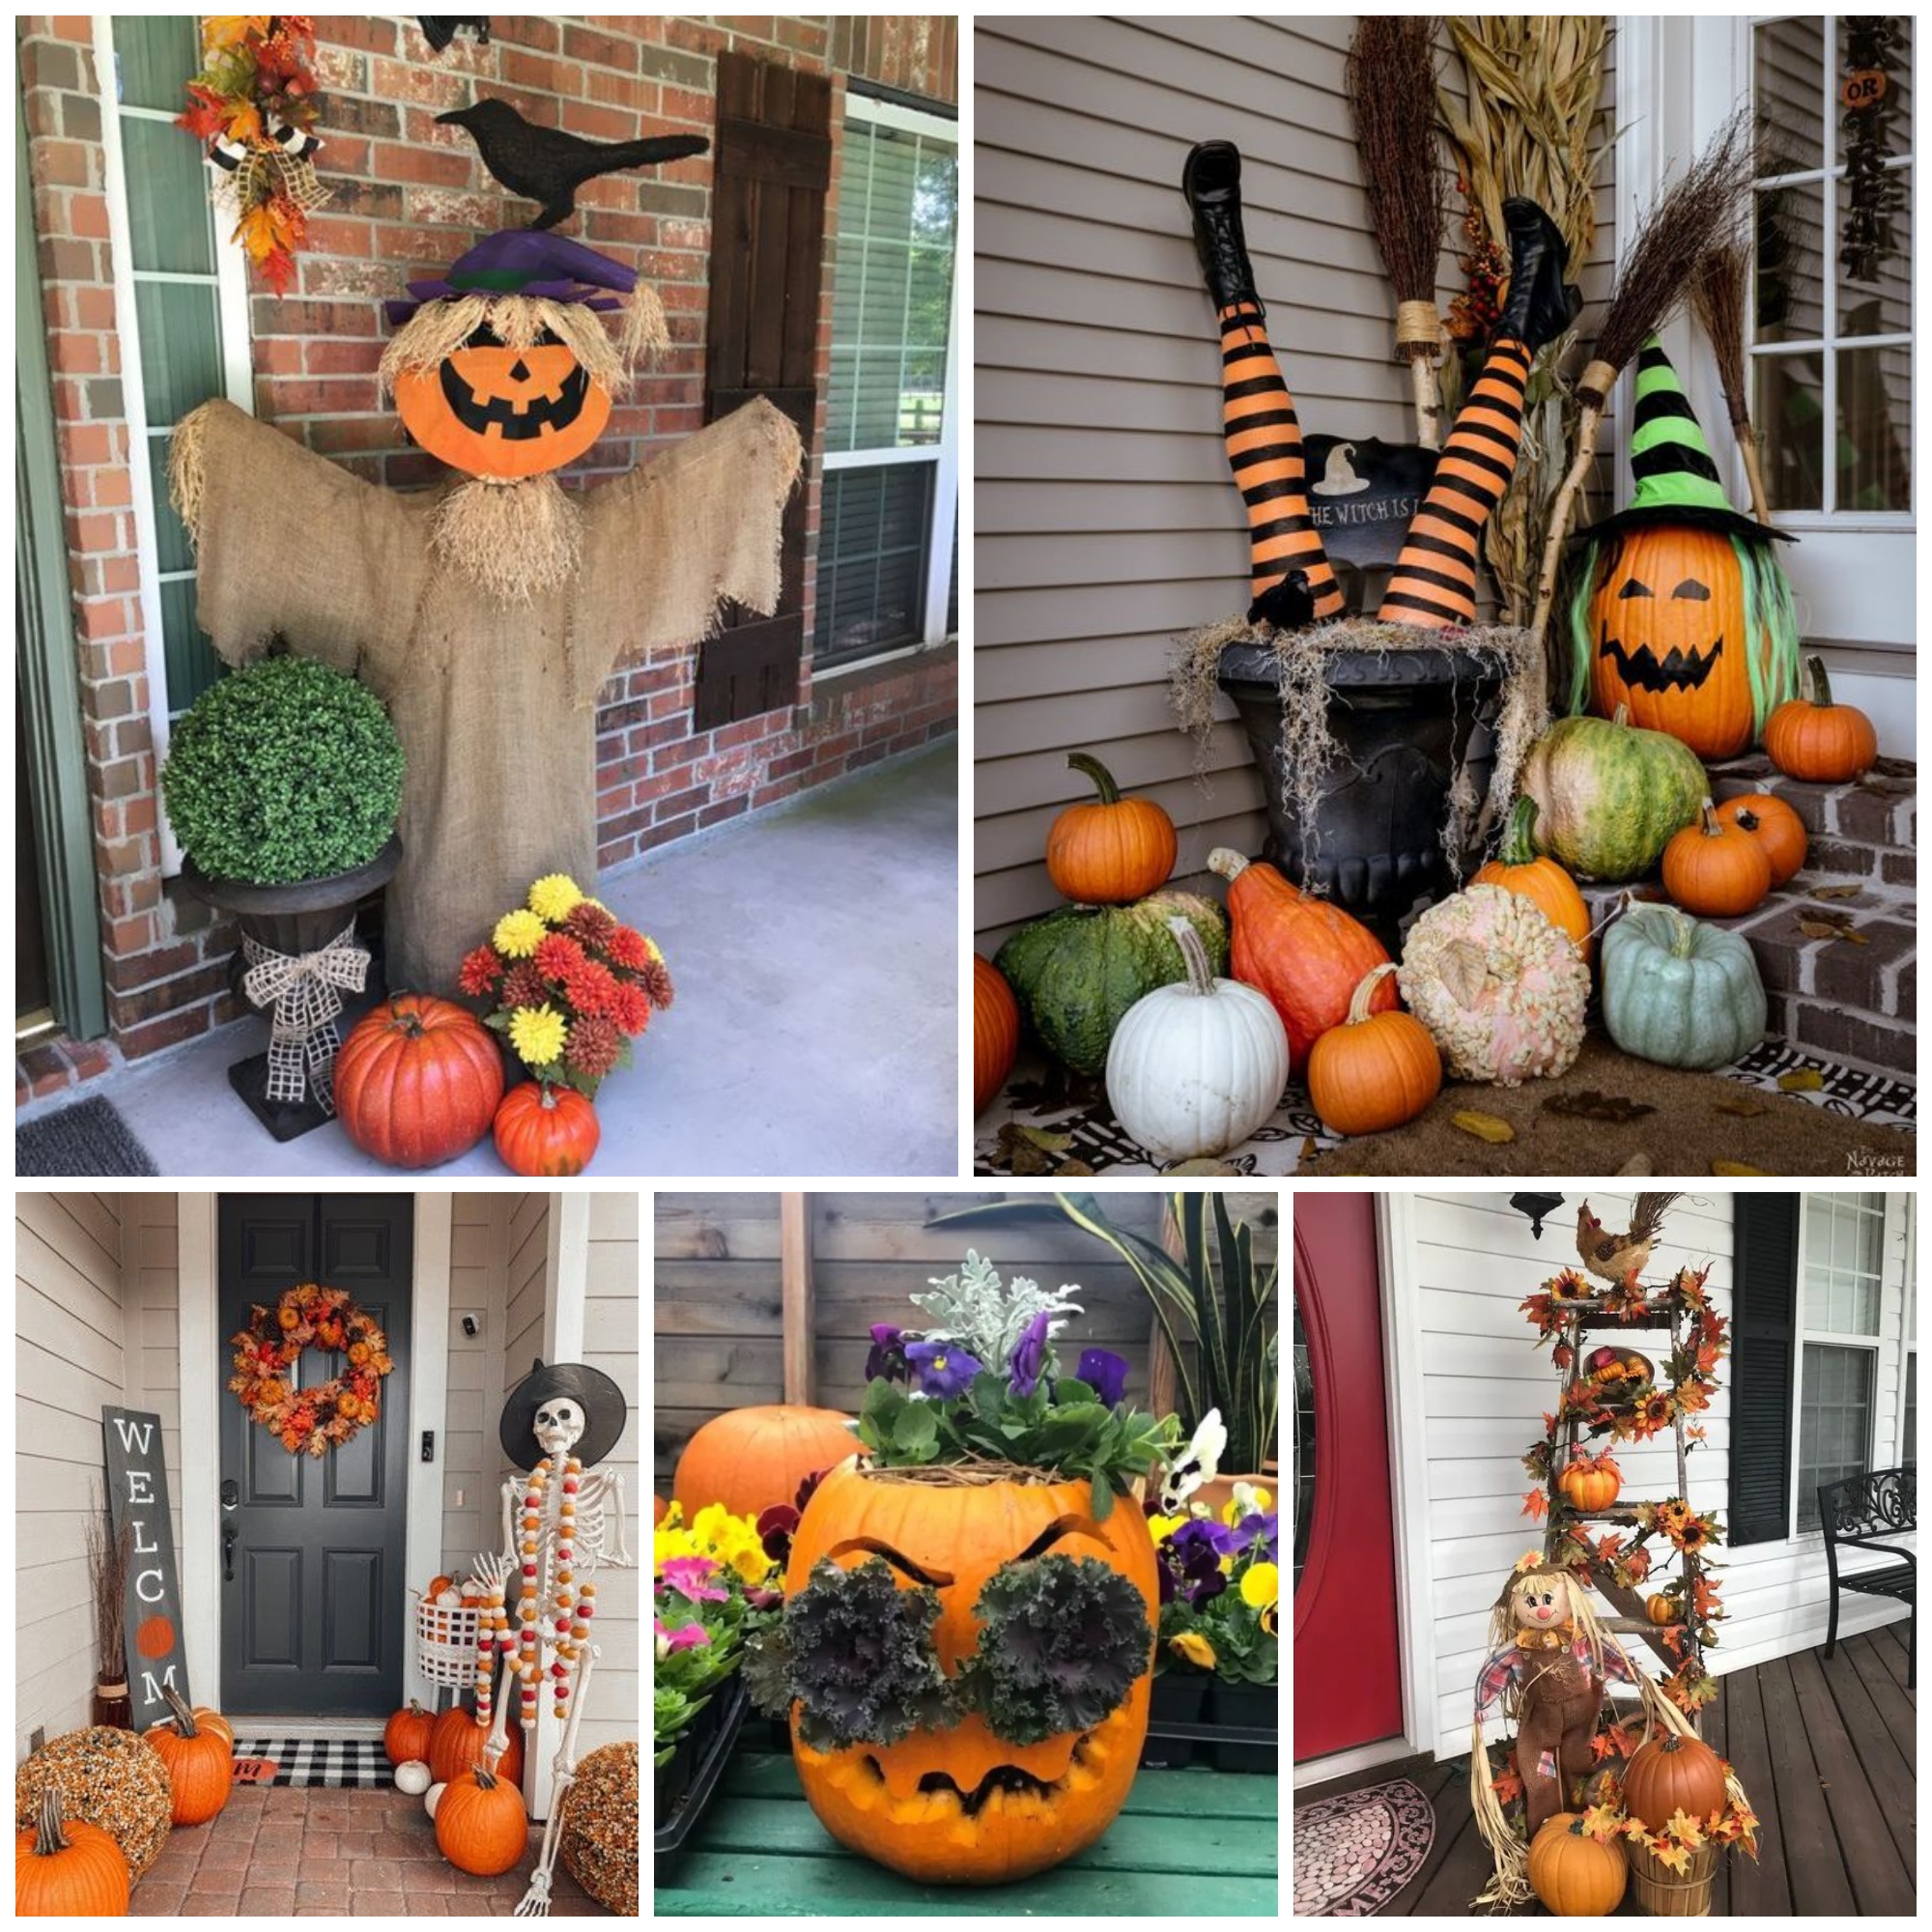 52 Amazing DIY pumpkin projects to make a fall or Halloween decoration